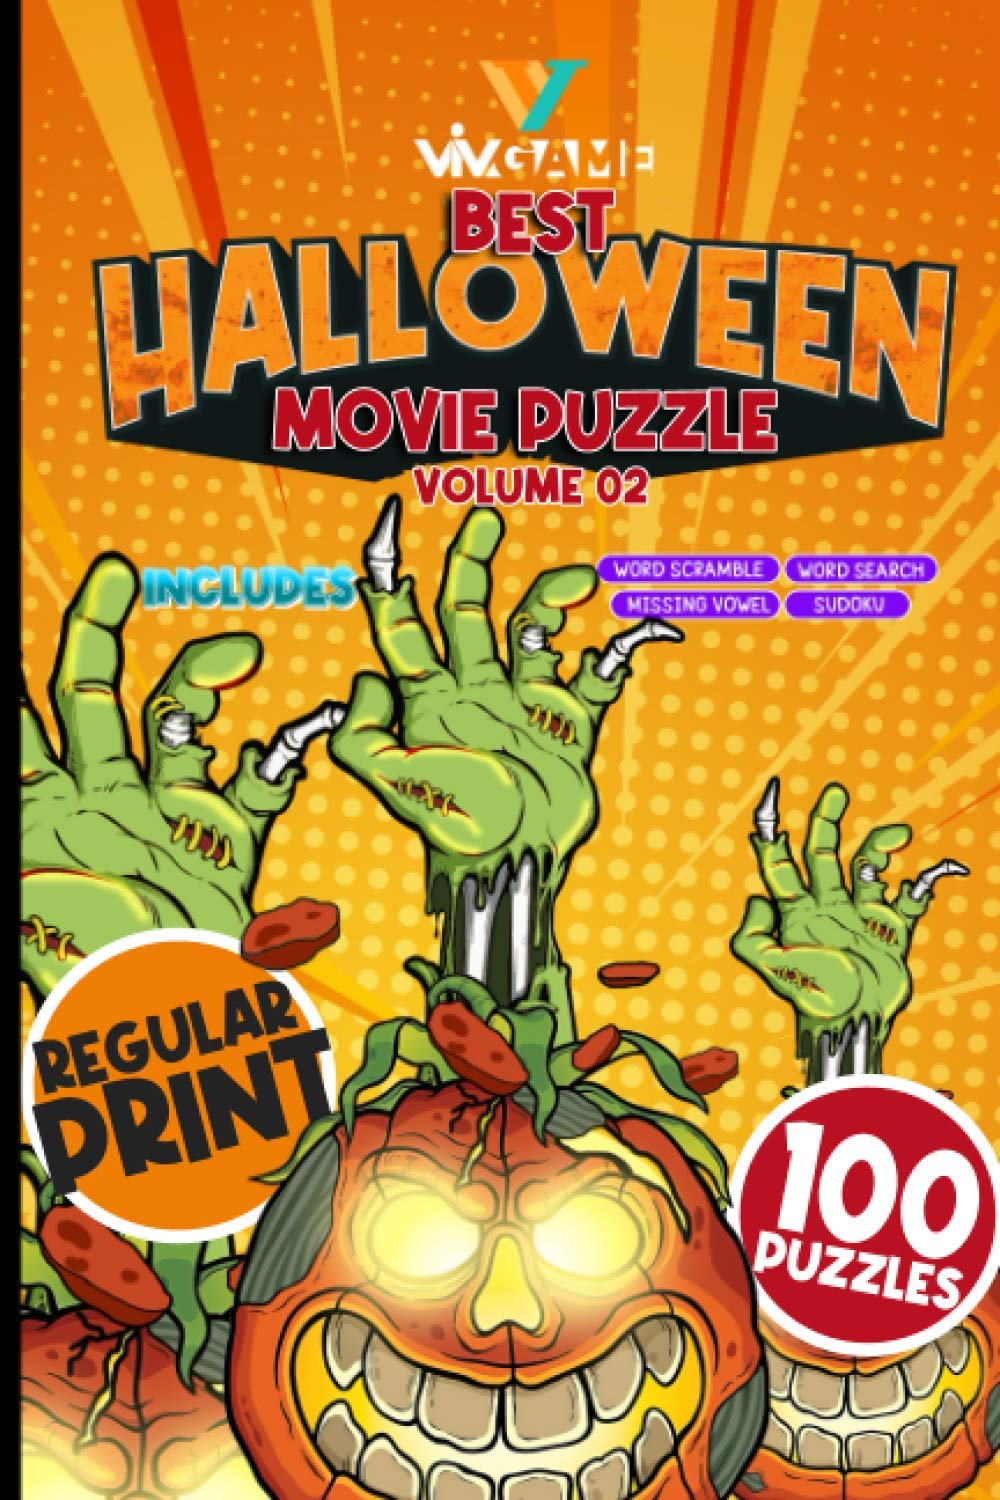 Best Halloween Movie Puzzle Volume 2 Includes Word Search Sudoku Word Scramble Missing Vowel: Regular Print 100 Puzzles On Horror Scary Hollywood Film (Movie Lovers' Word Search Puzzle) -